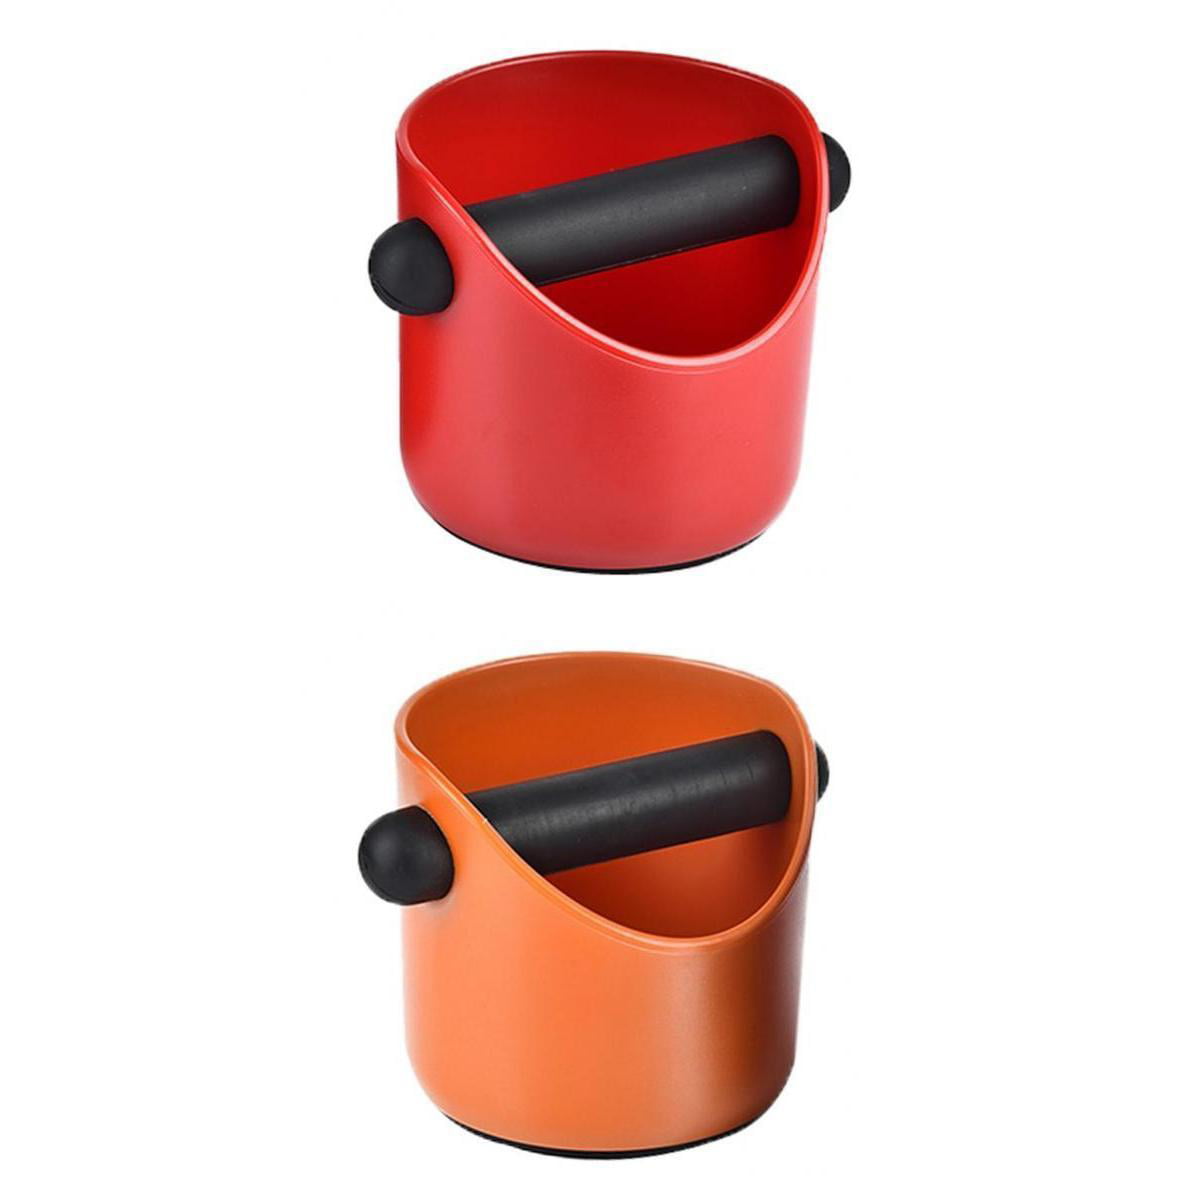 Coffee Knock Box Orange/Black  Espresso Grinds Container Recycle Holder Durable 